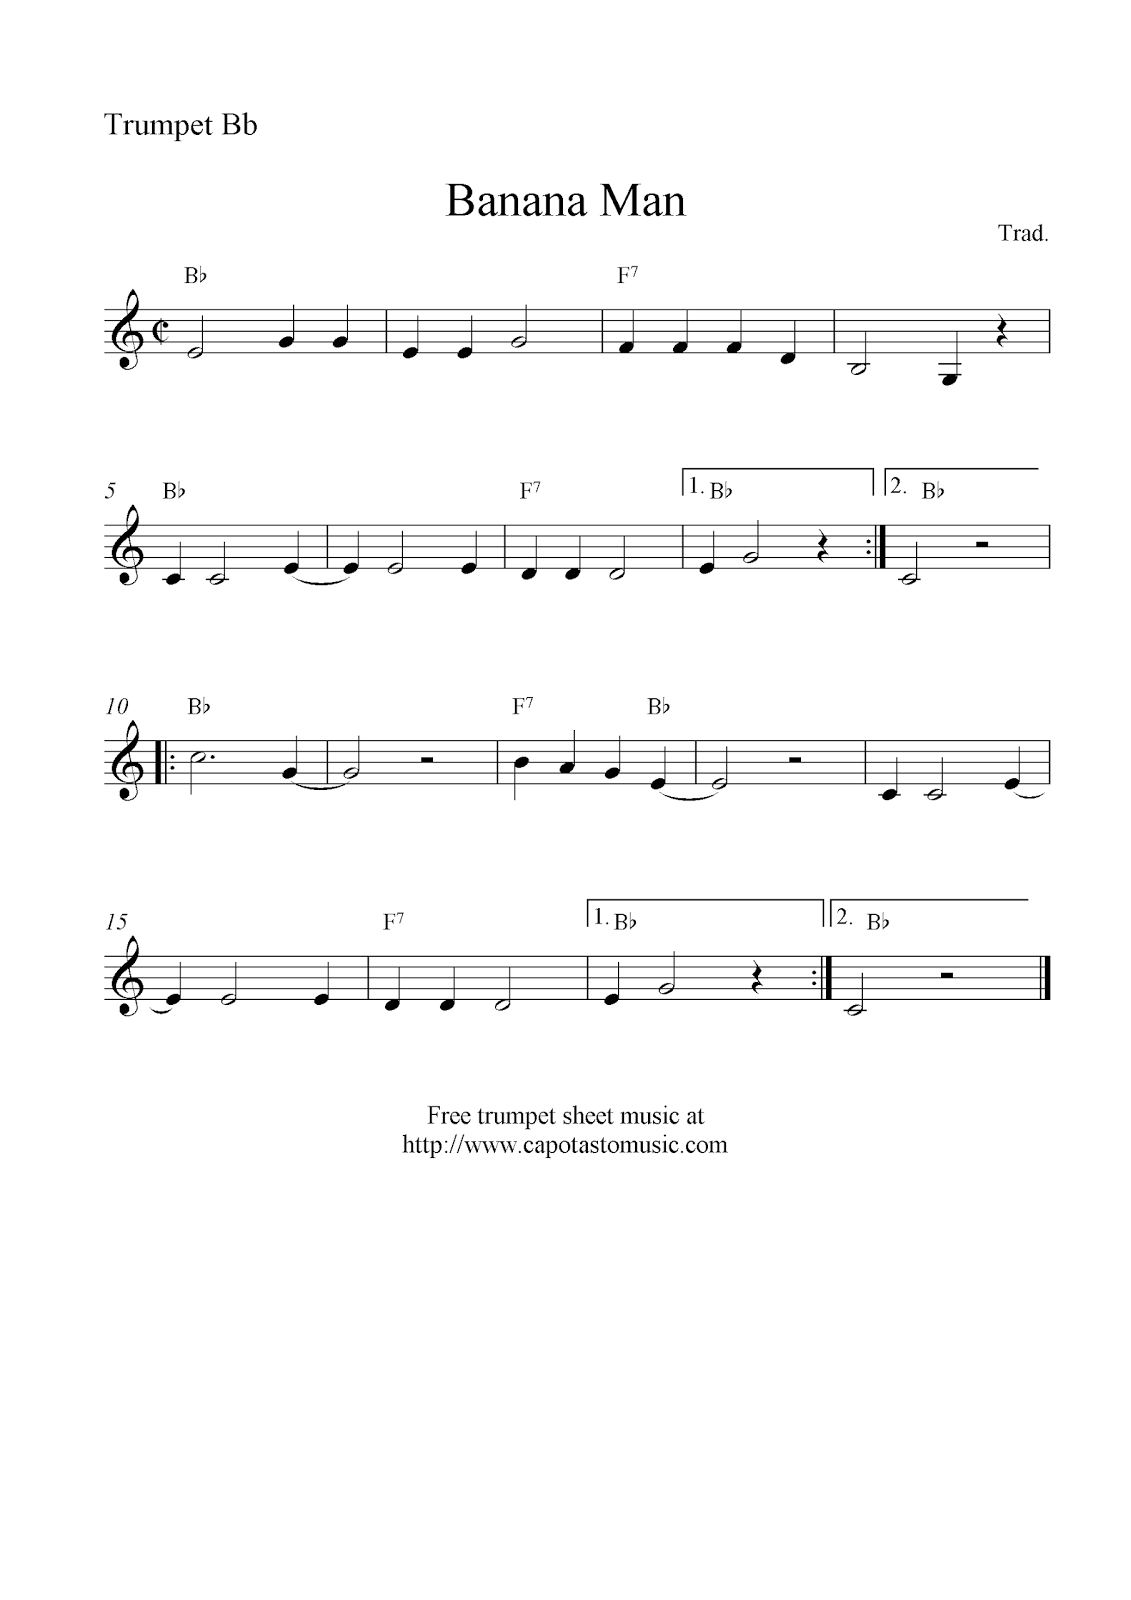 banana-man-free-christmas-trumpet-sheet-music-notes-images-frompo